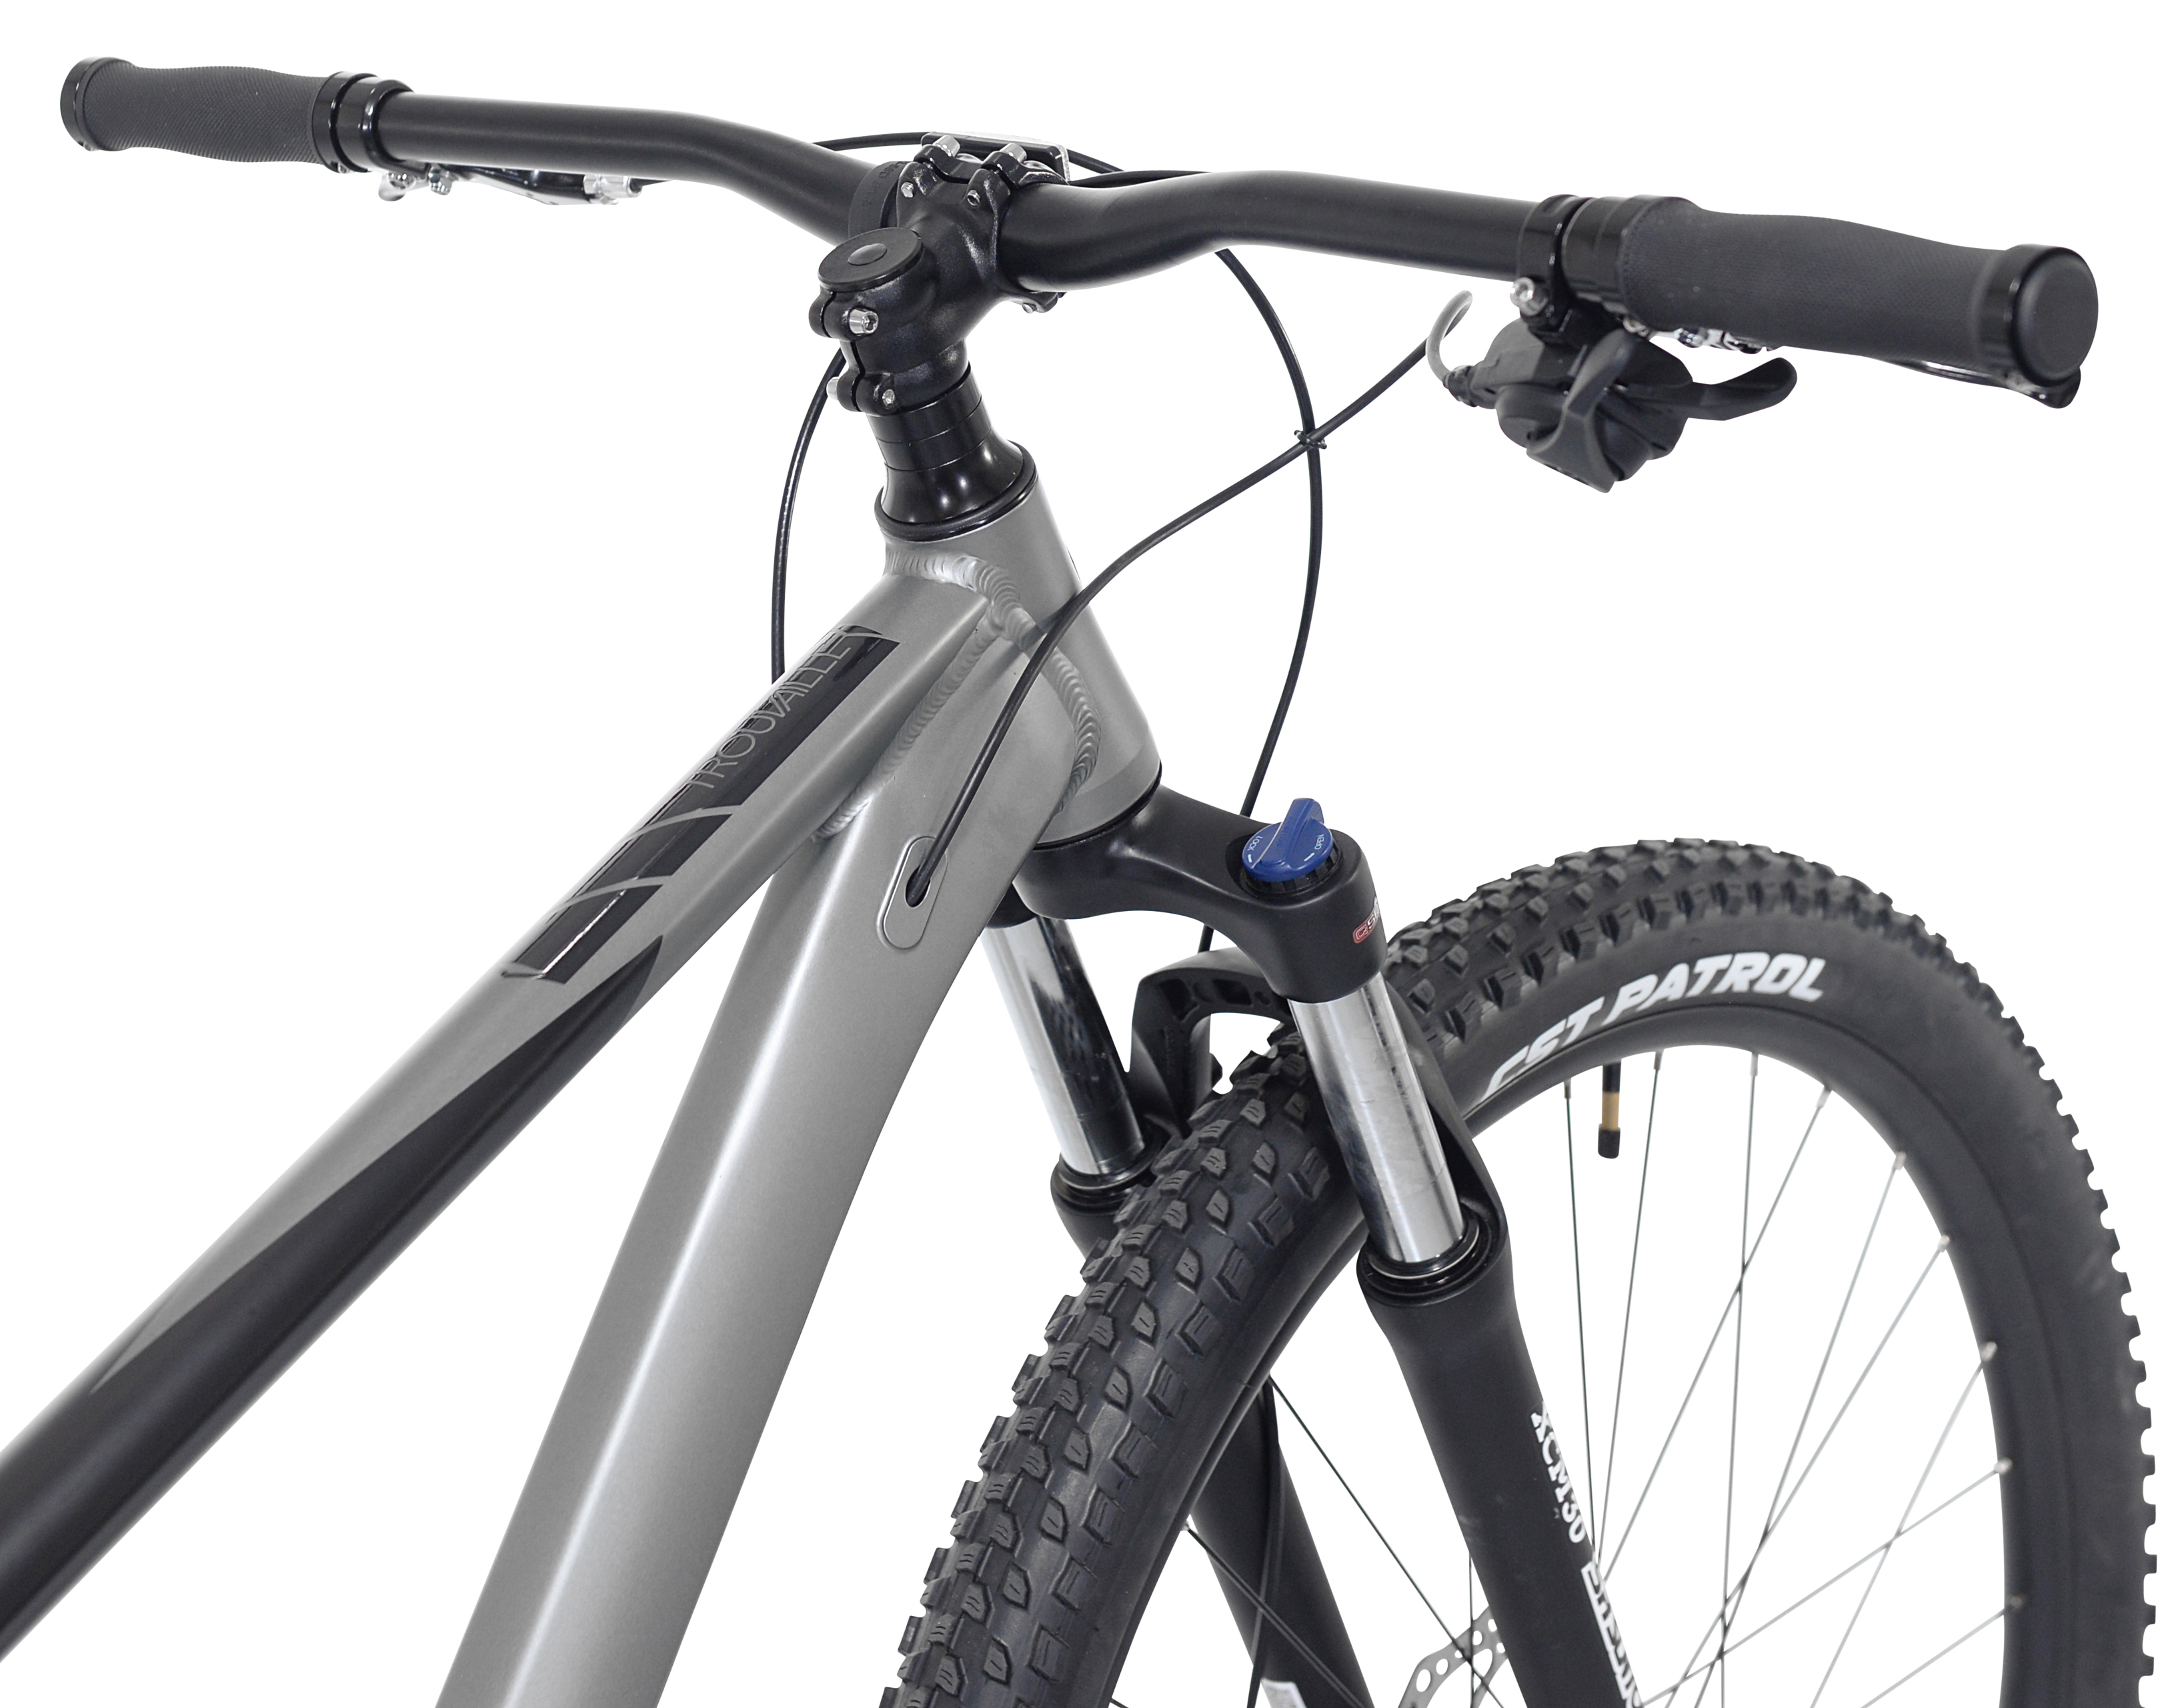 Kent Bicycles 29" Men's Trouvaille Mountain Bike Medium, Black and Taupe - image 4 of 11